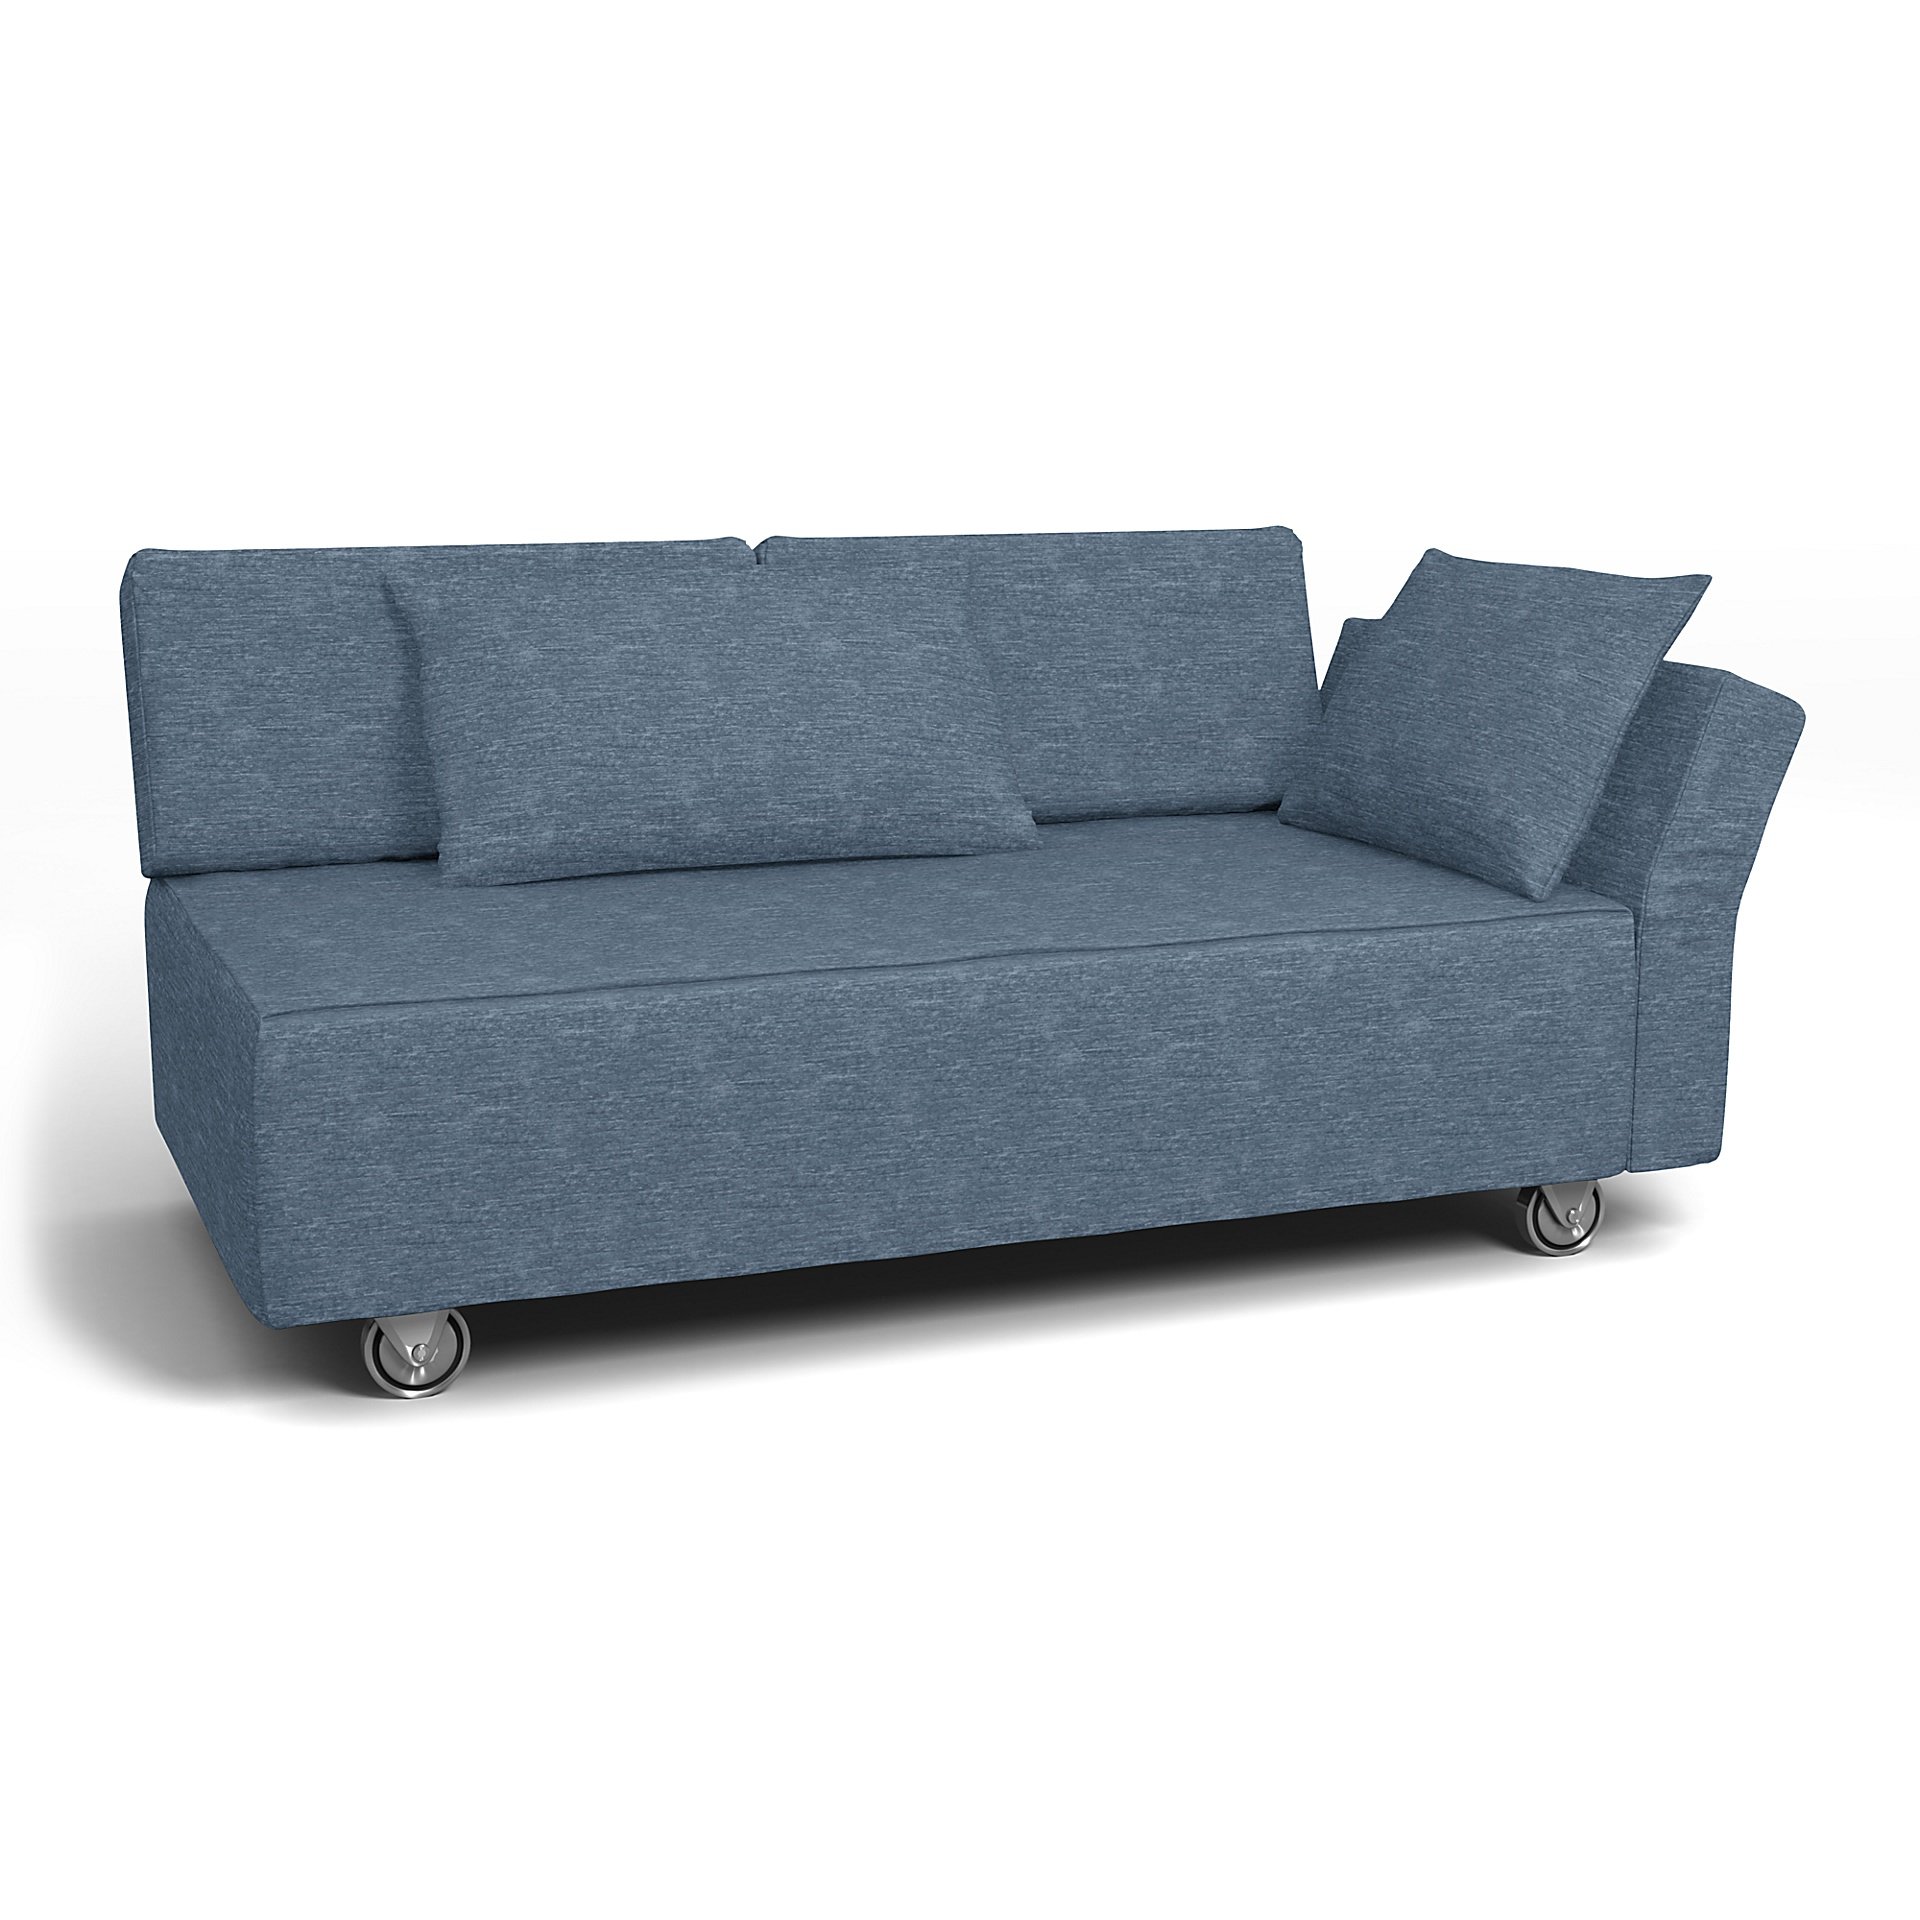 IKEA - Falsterbo 2 Seat Sofa with Right Arm Cover, Mineral Blue, Velvet - Bemz